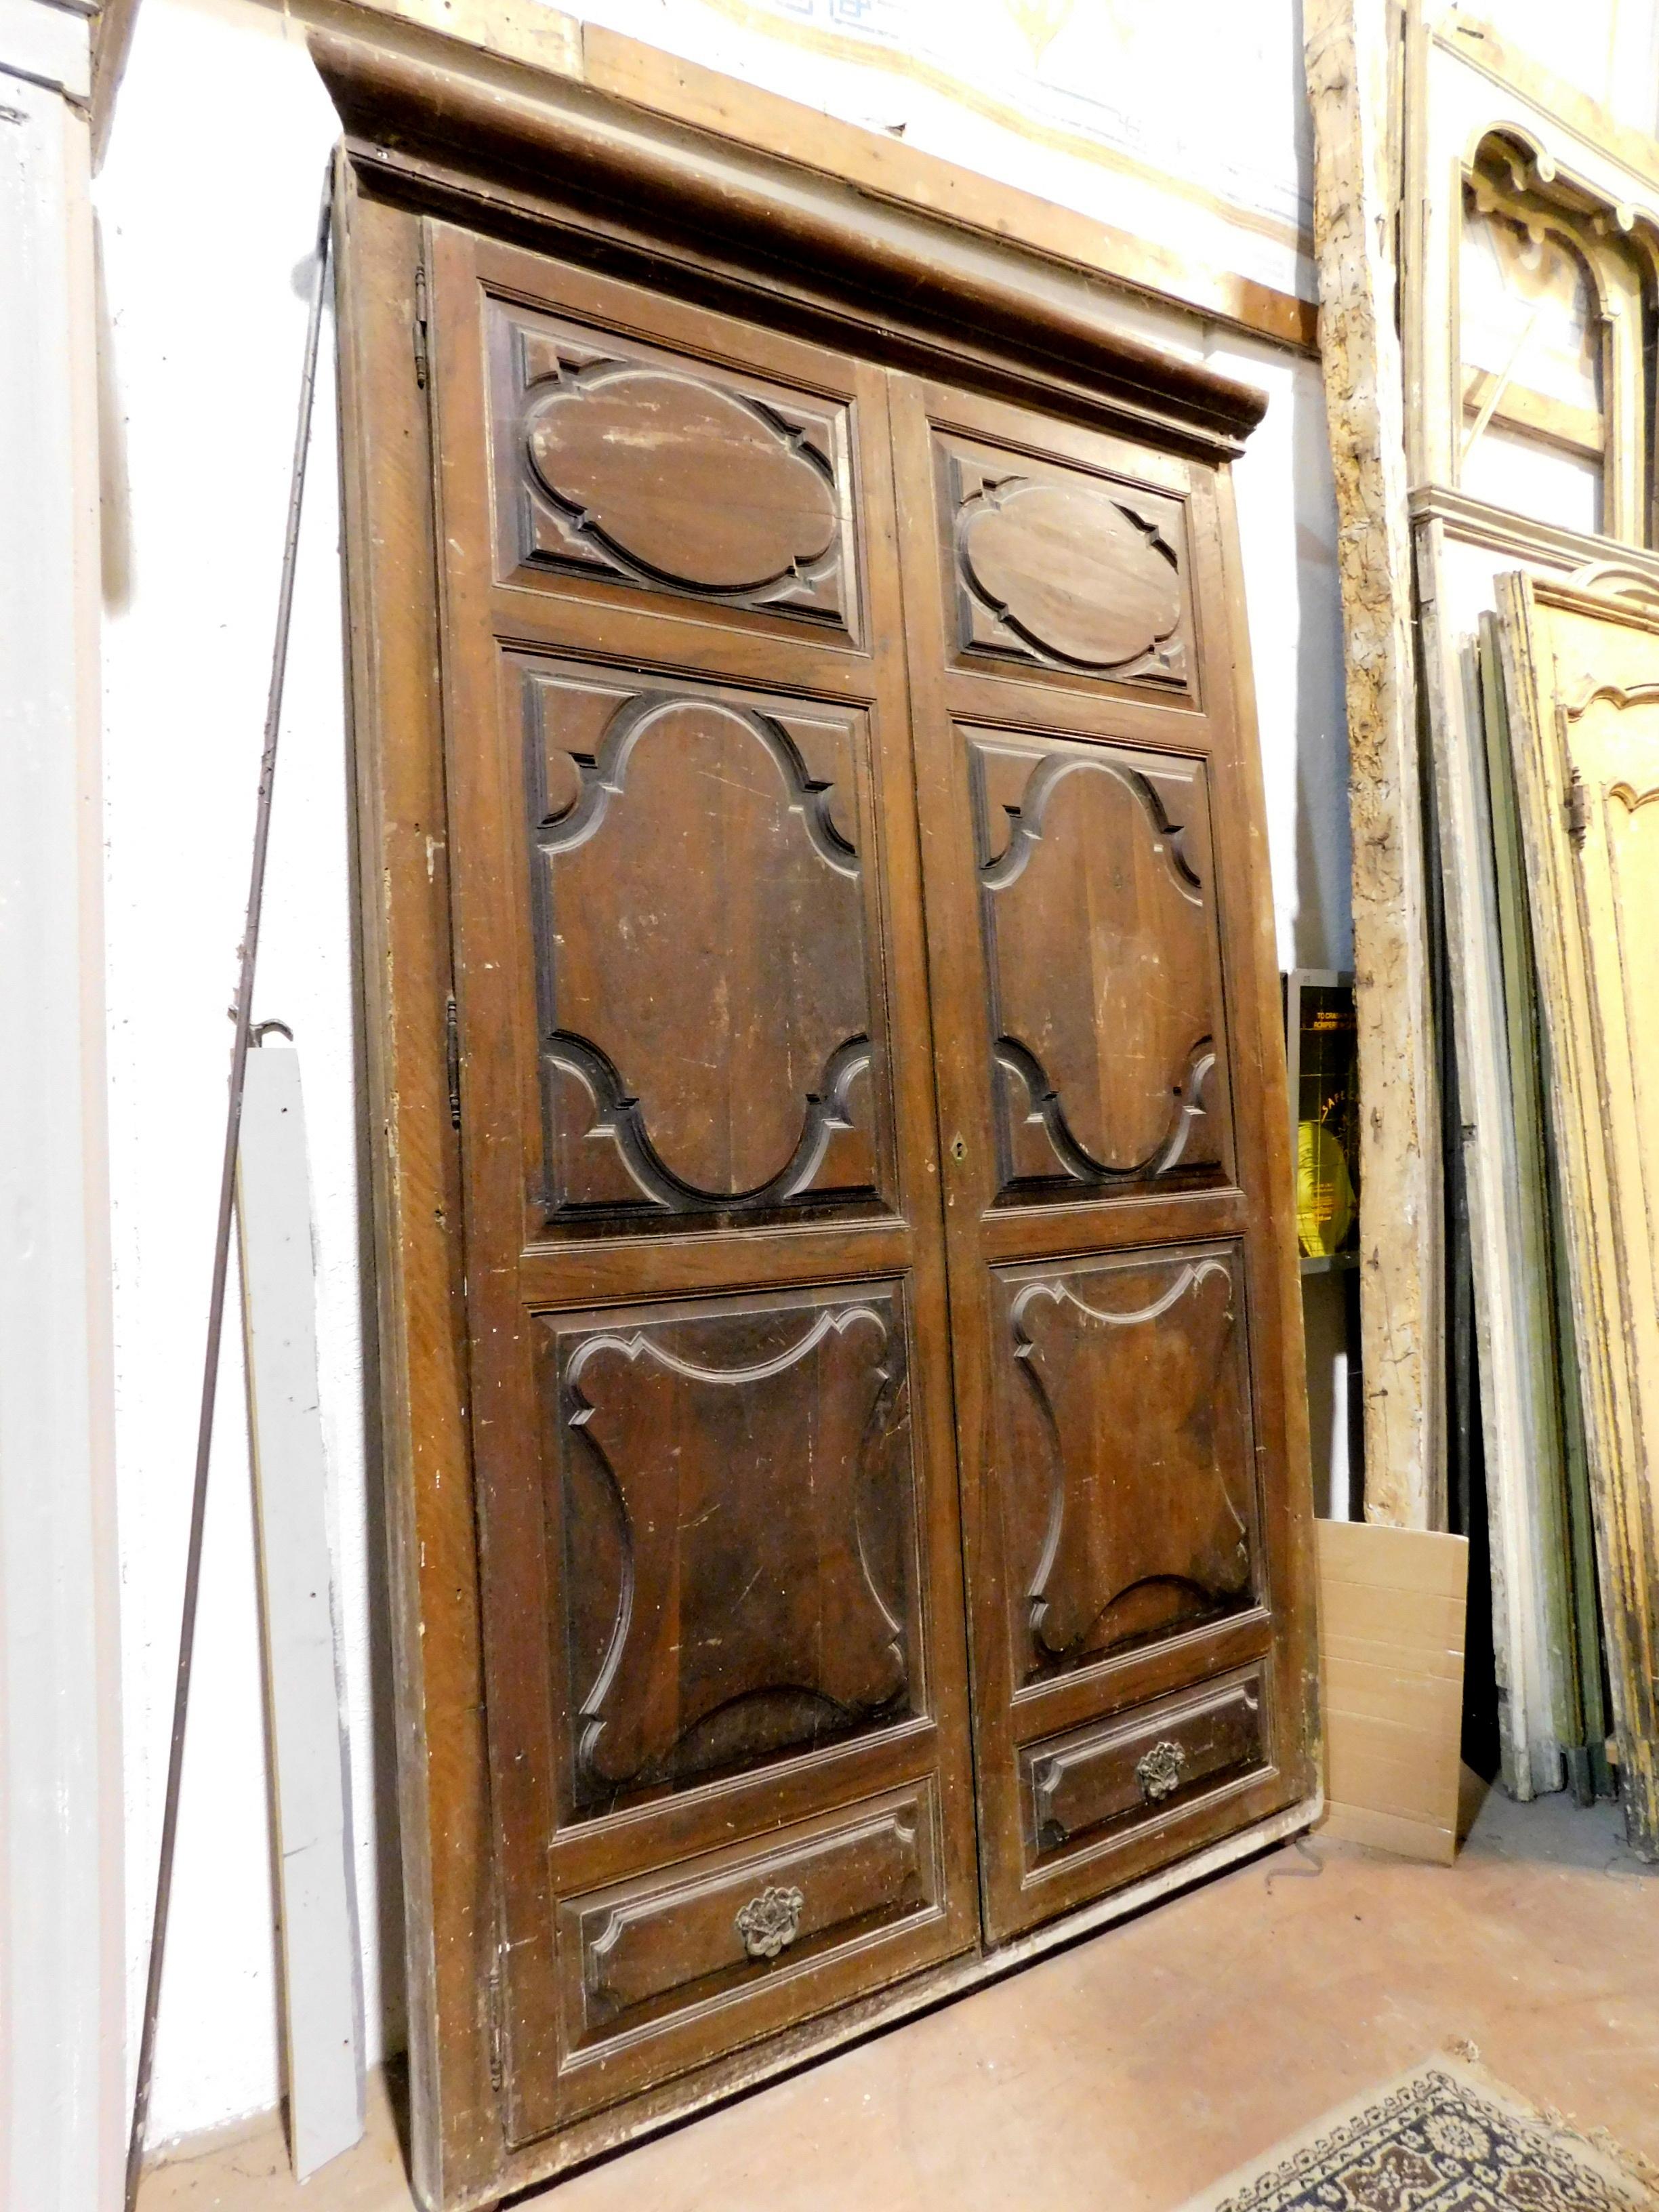 Antique walnut wall cabinet, hand-carved cupboard, consisting of two large doors and frame with hat, panels carved with Baroque tiles, in very sturdy solid walnut, built and sculpted entirely by hand in the 17th century, for wardrobes at home in